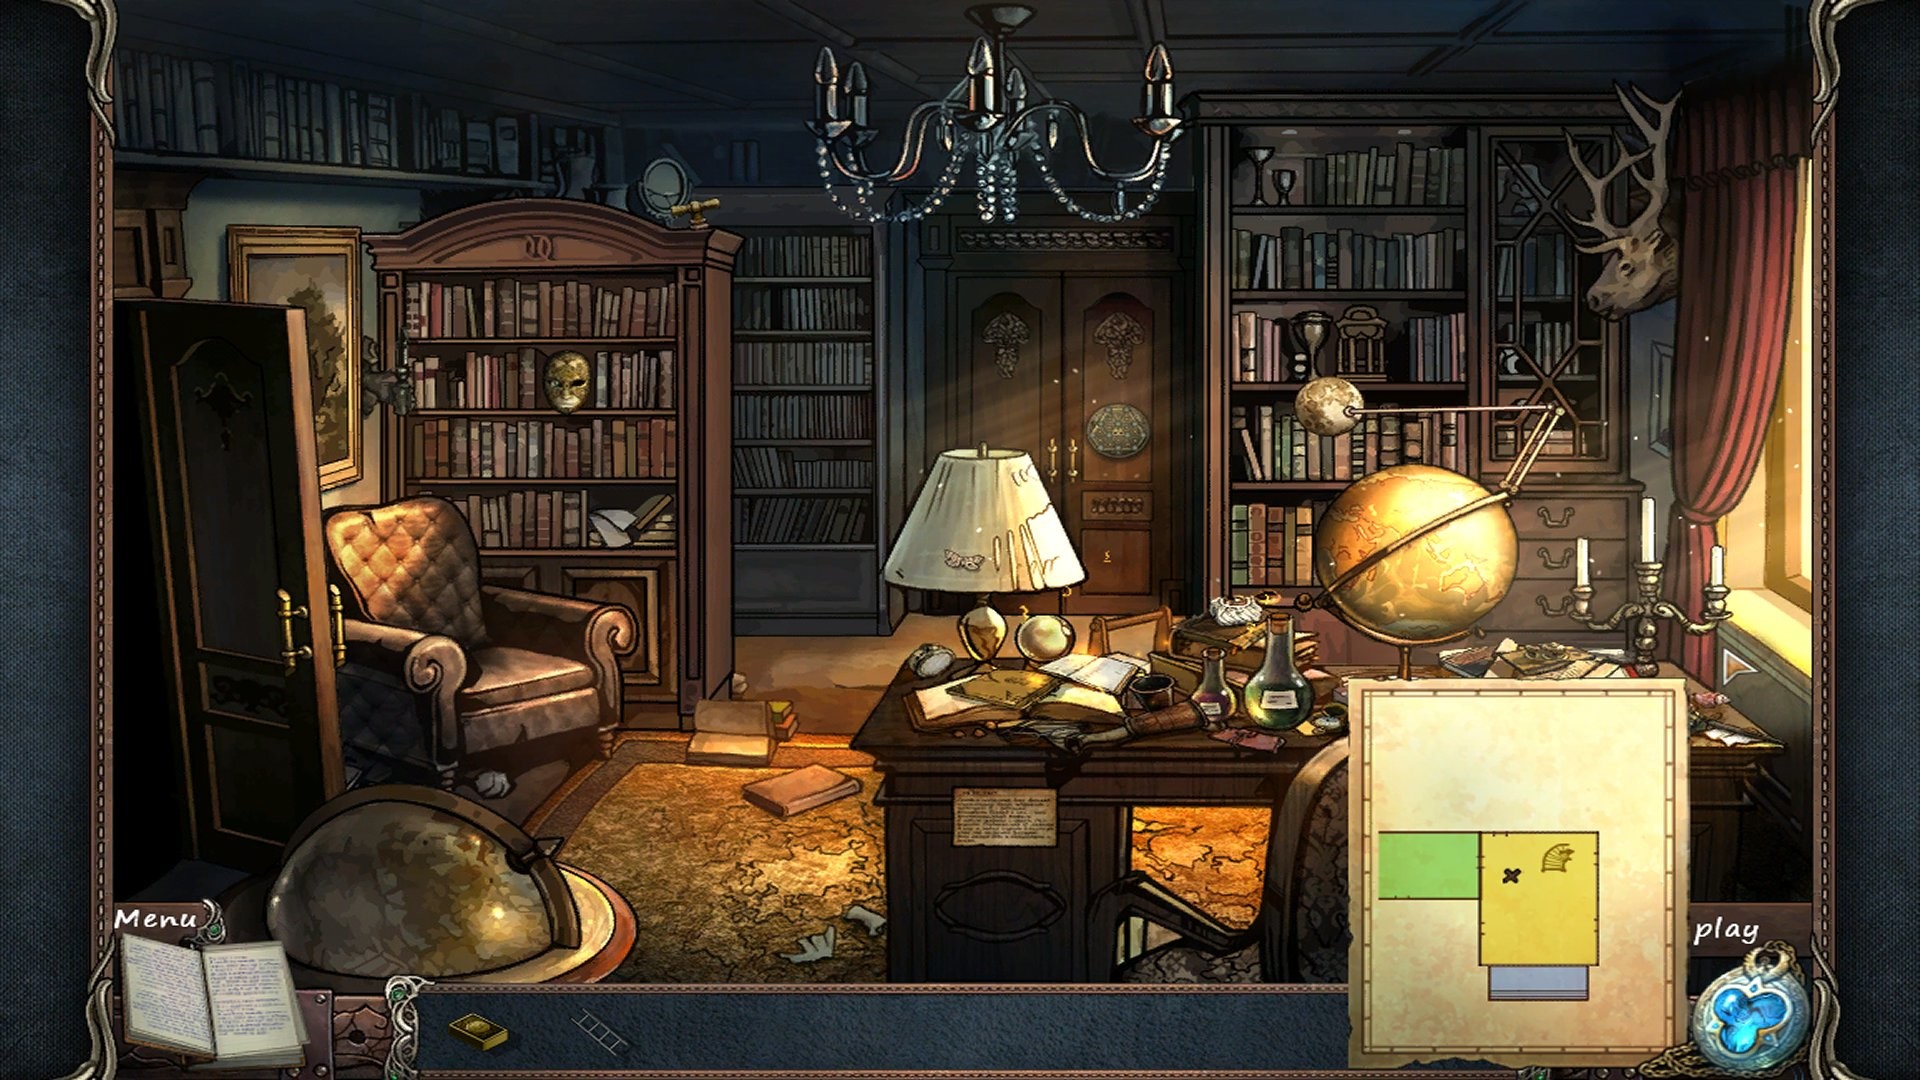 Mystery of Mortlake Mansion Free Download